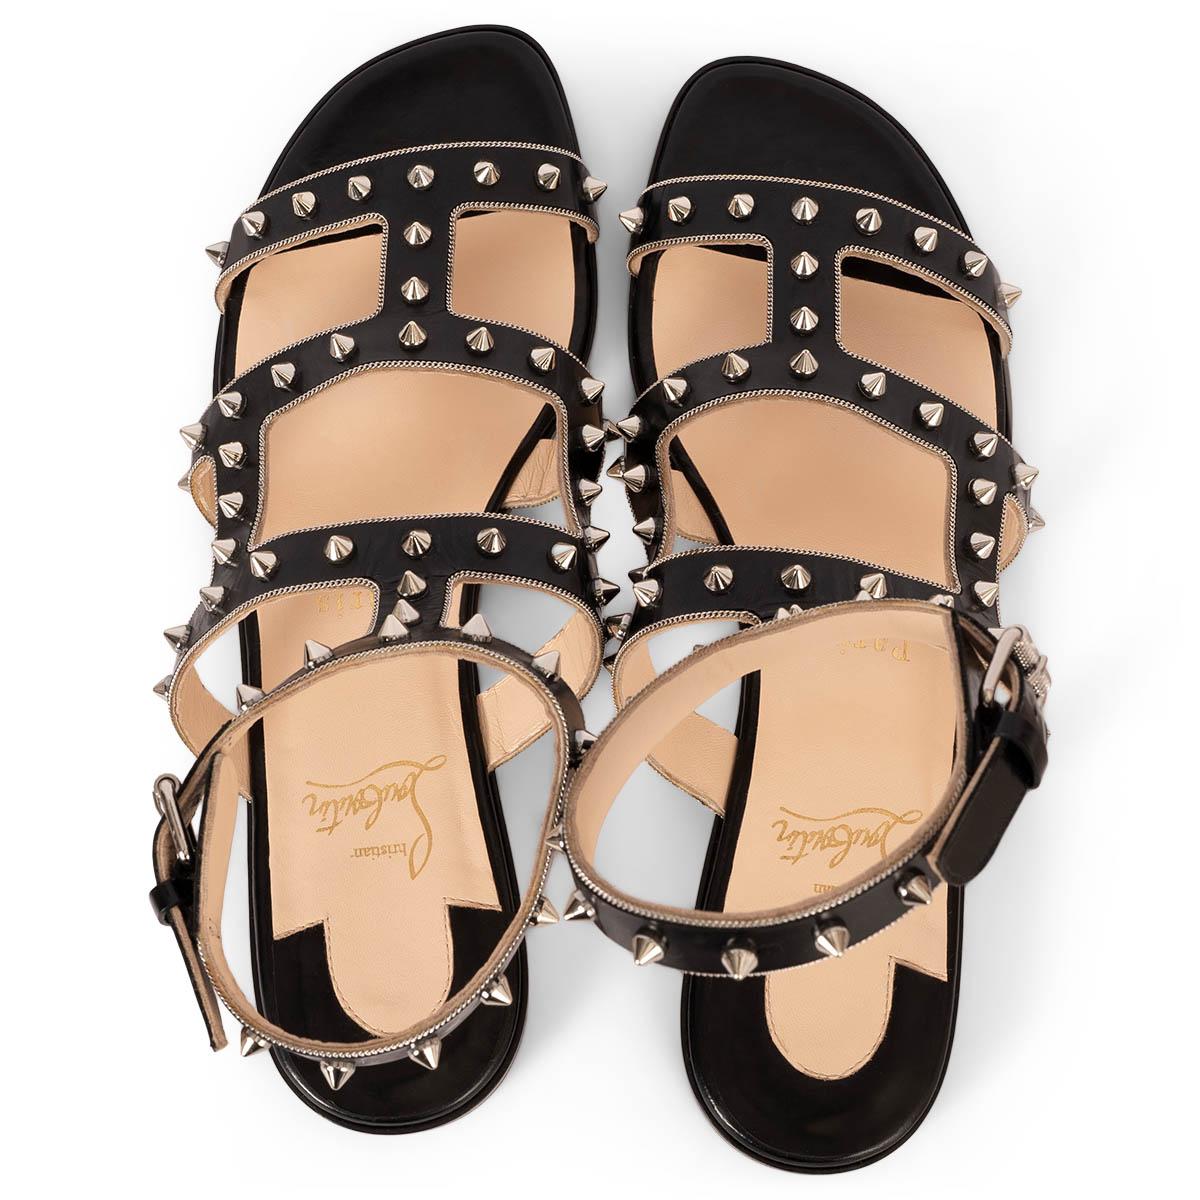 CHRISTIAN LOUBOUTIN black leather SEXISTRAPI Gladiator Sandals Shoes 39 fit 38.5 For Sale 2